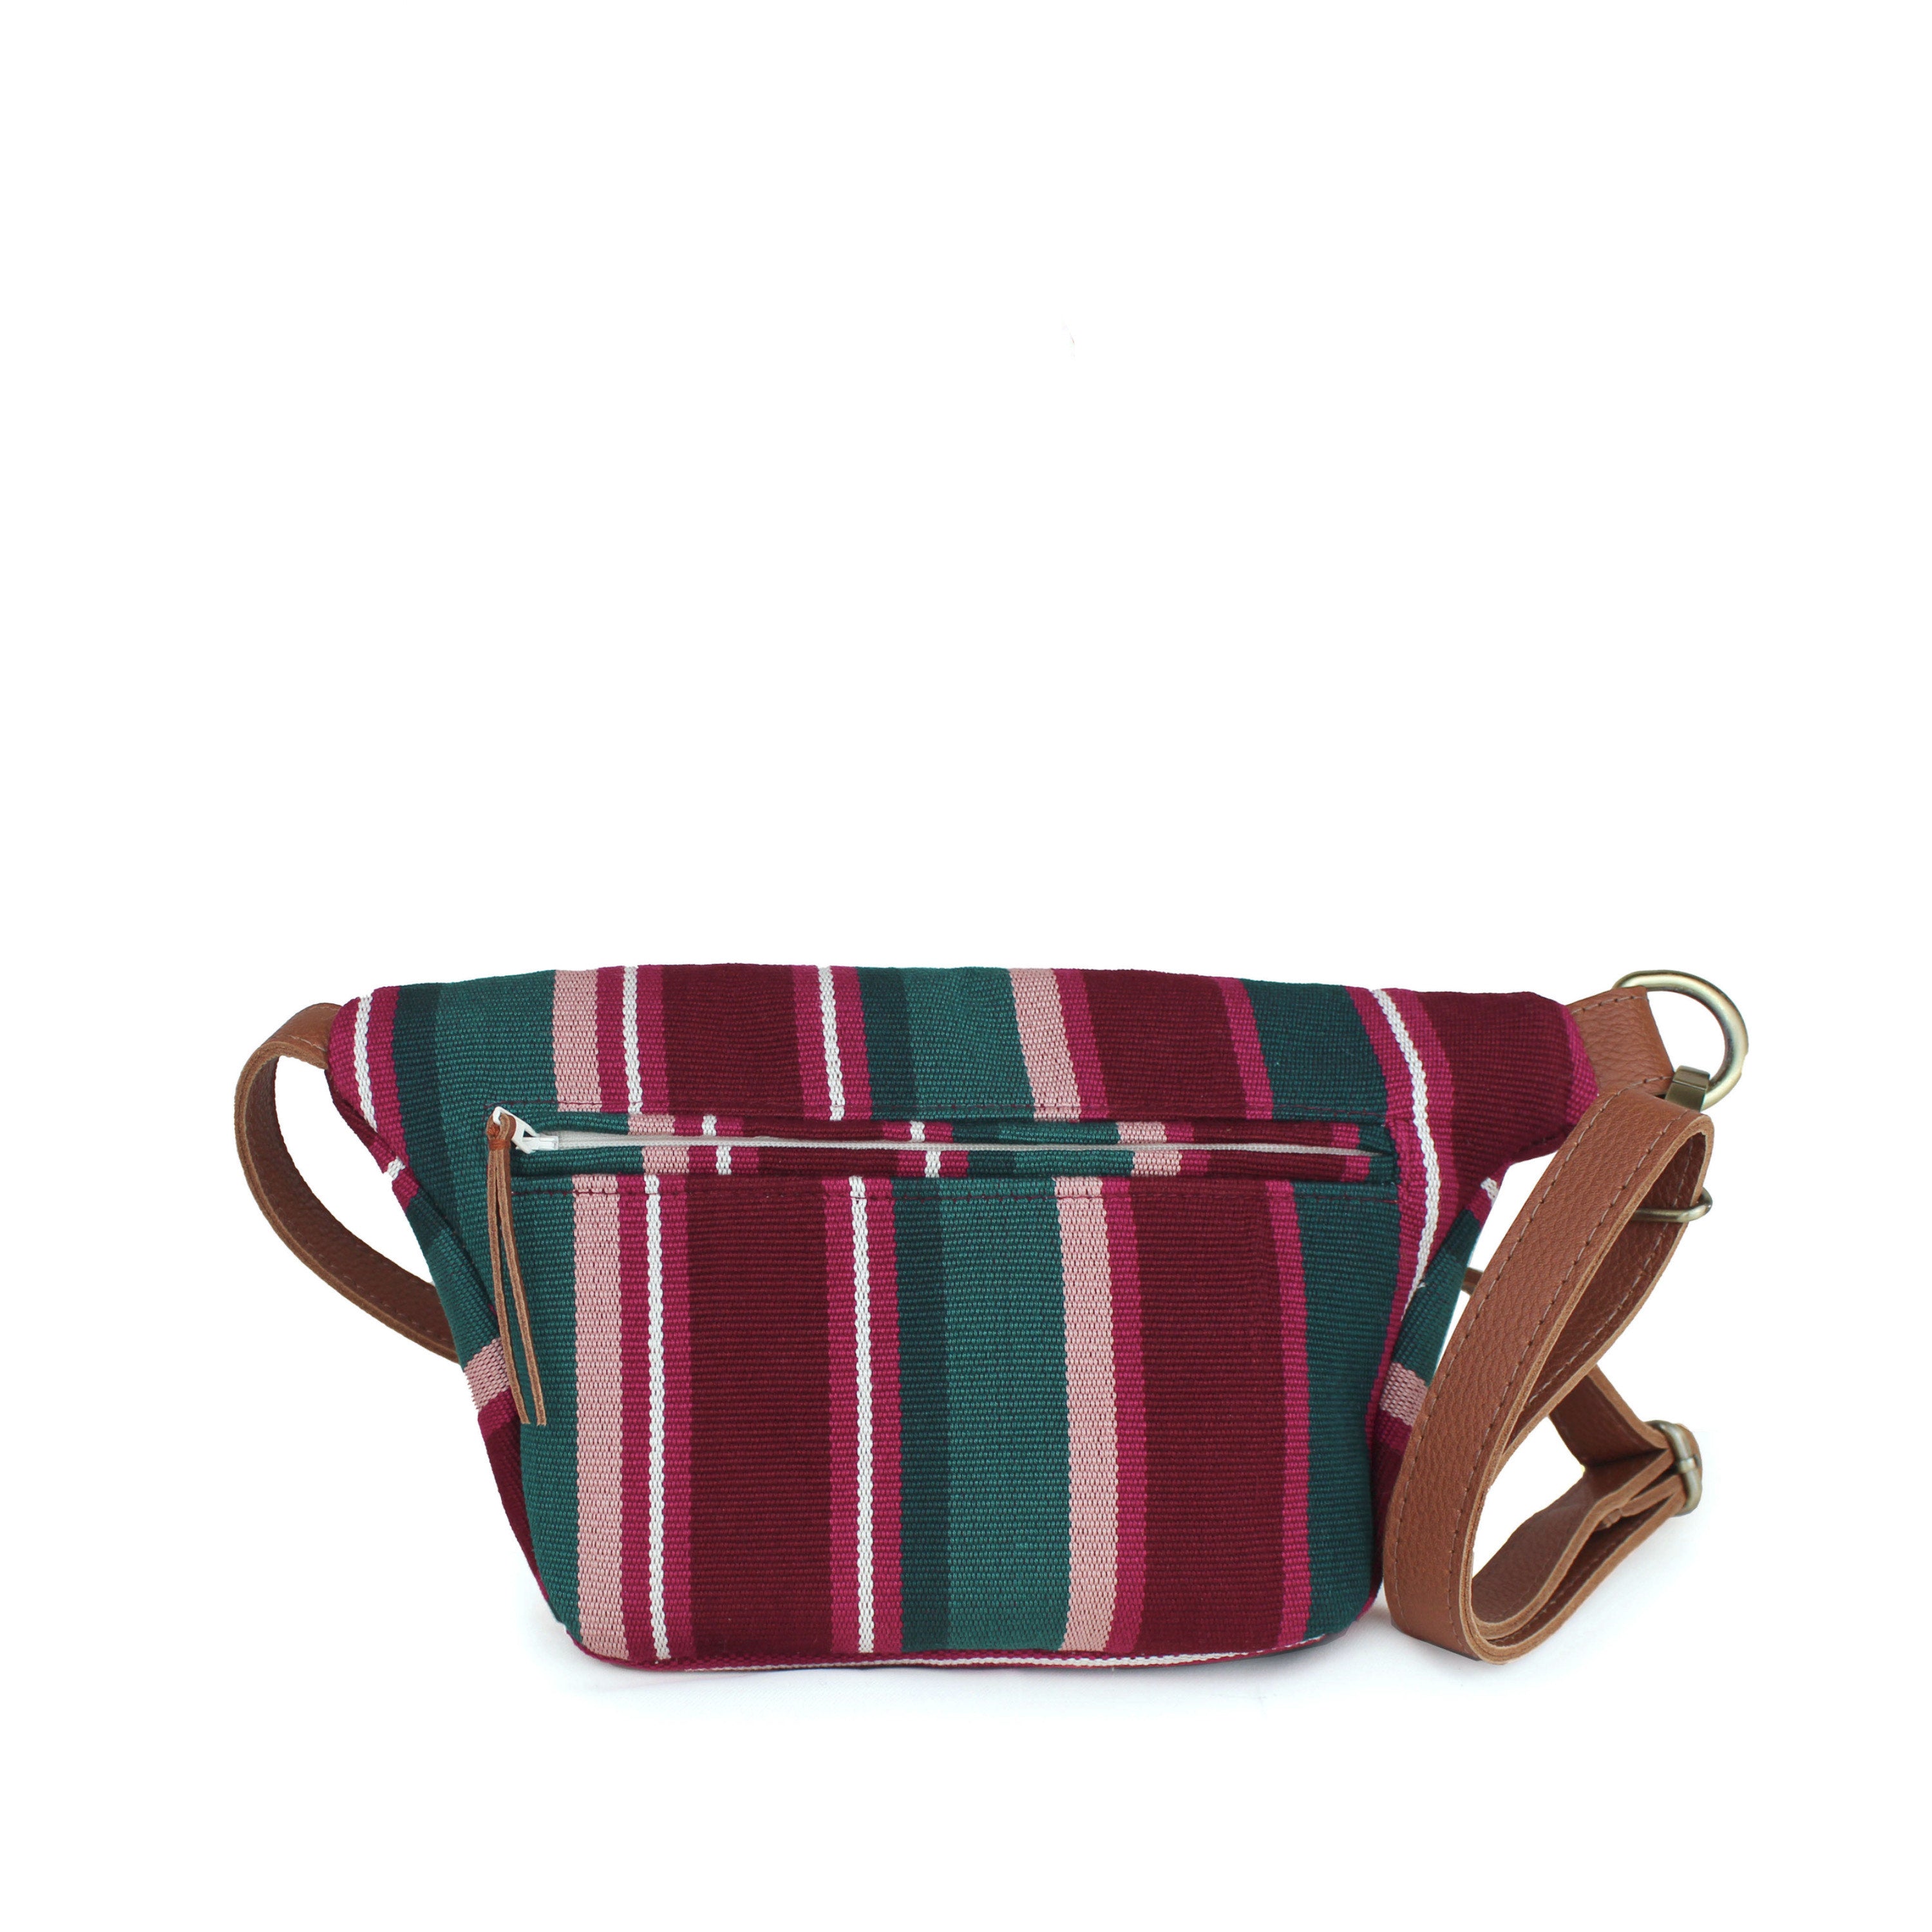 Back view of the hand woven artisan Cruza Sling in Ginger pattern. The back has vertical stripes in maroon, pink, and phthalo green colors. It has a zippered pocket with a leather zipper pull. It has an adjustable waist leather strap.